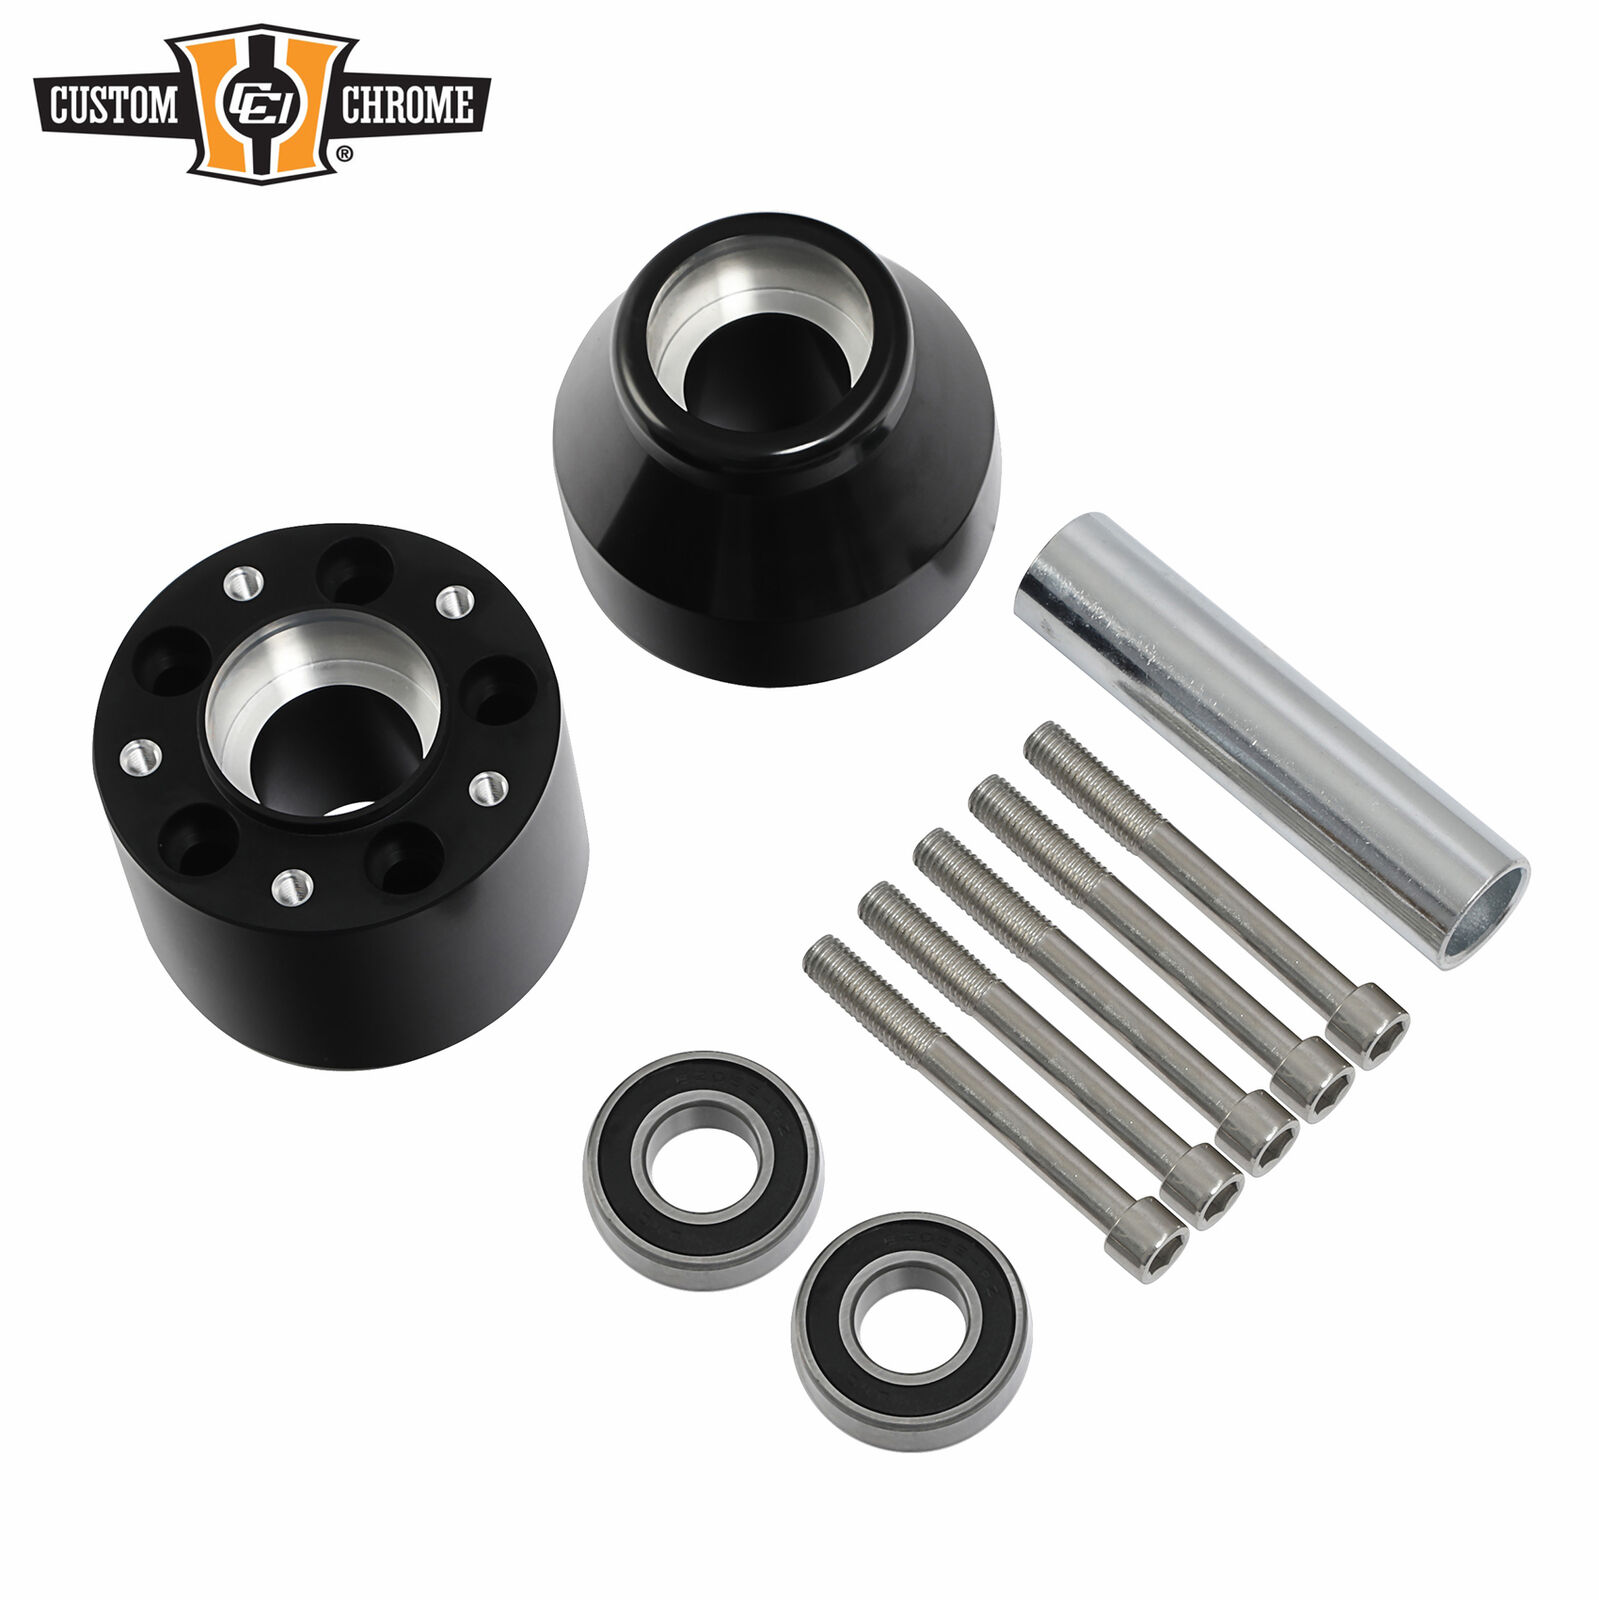 Single Disc Front Wheel Hub Fit For Harley Touring Road King Glide Non-ABS 08-Up